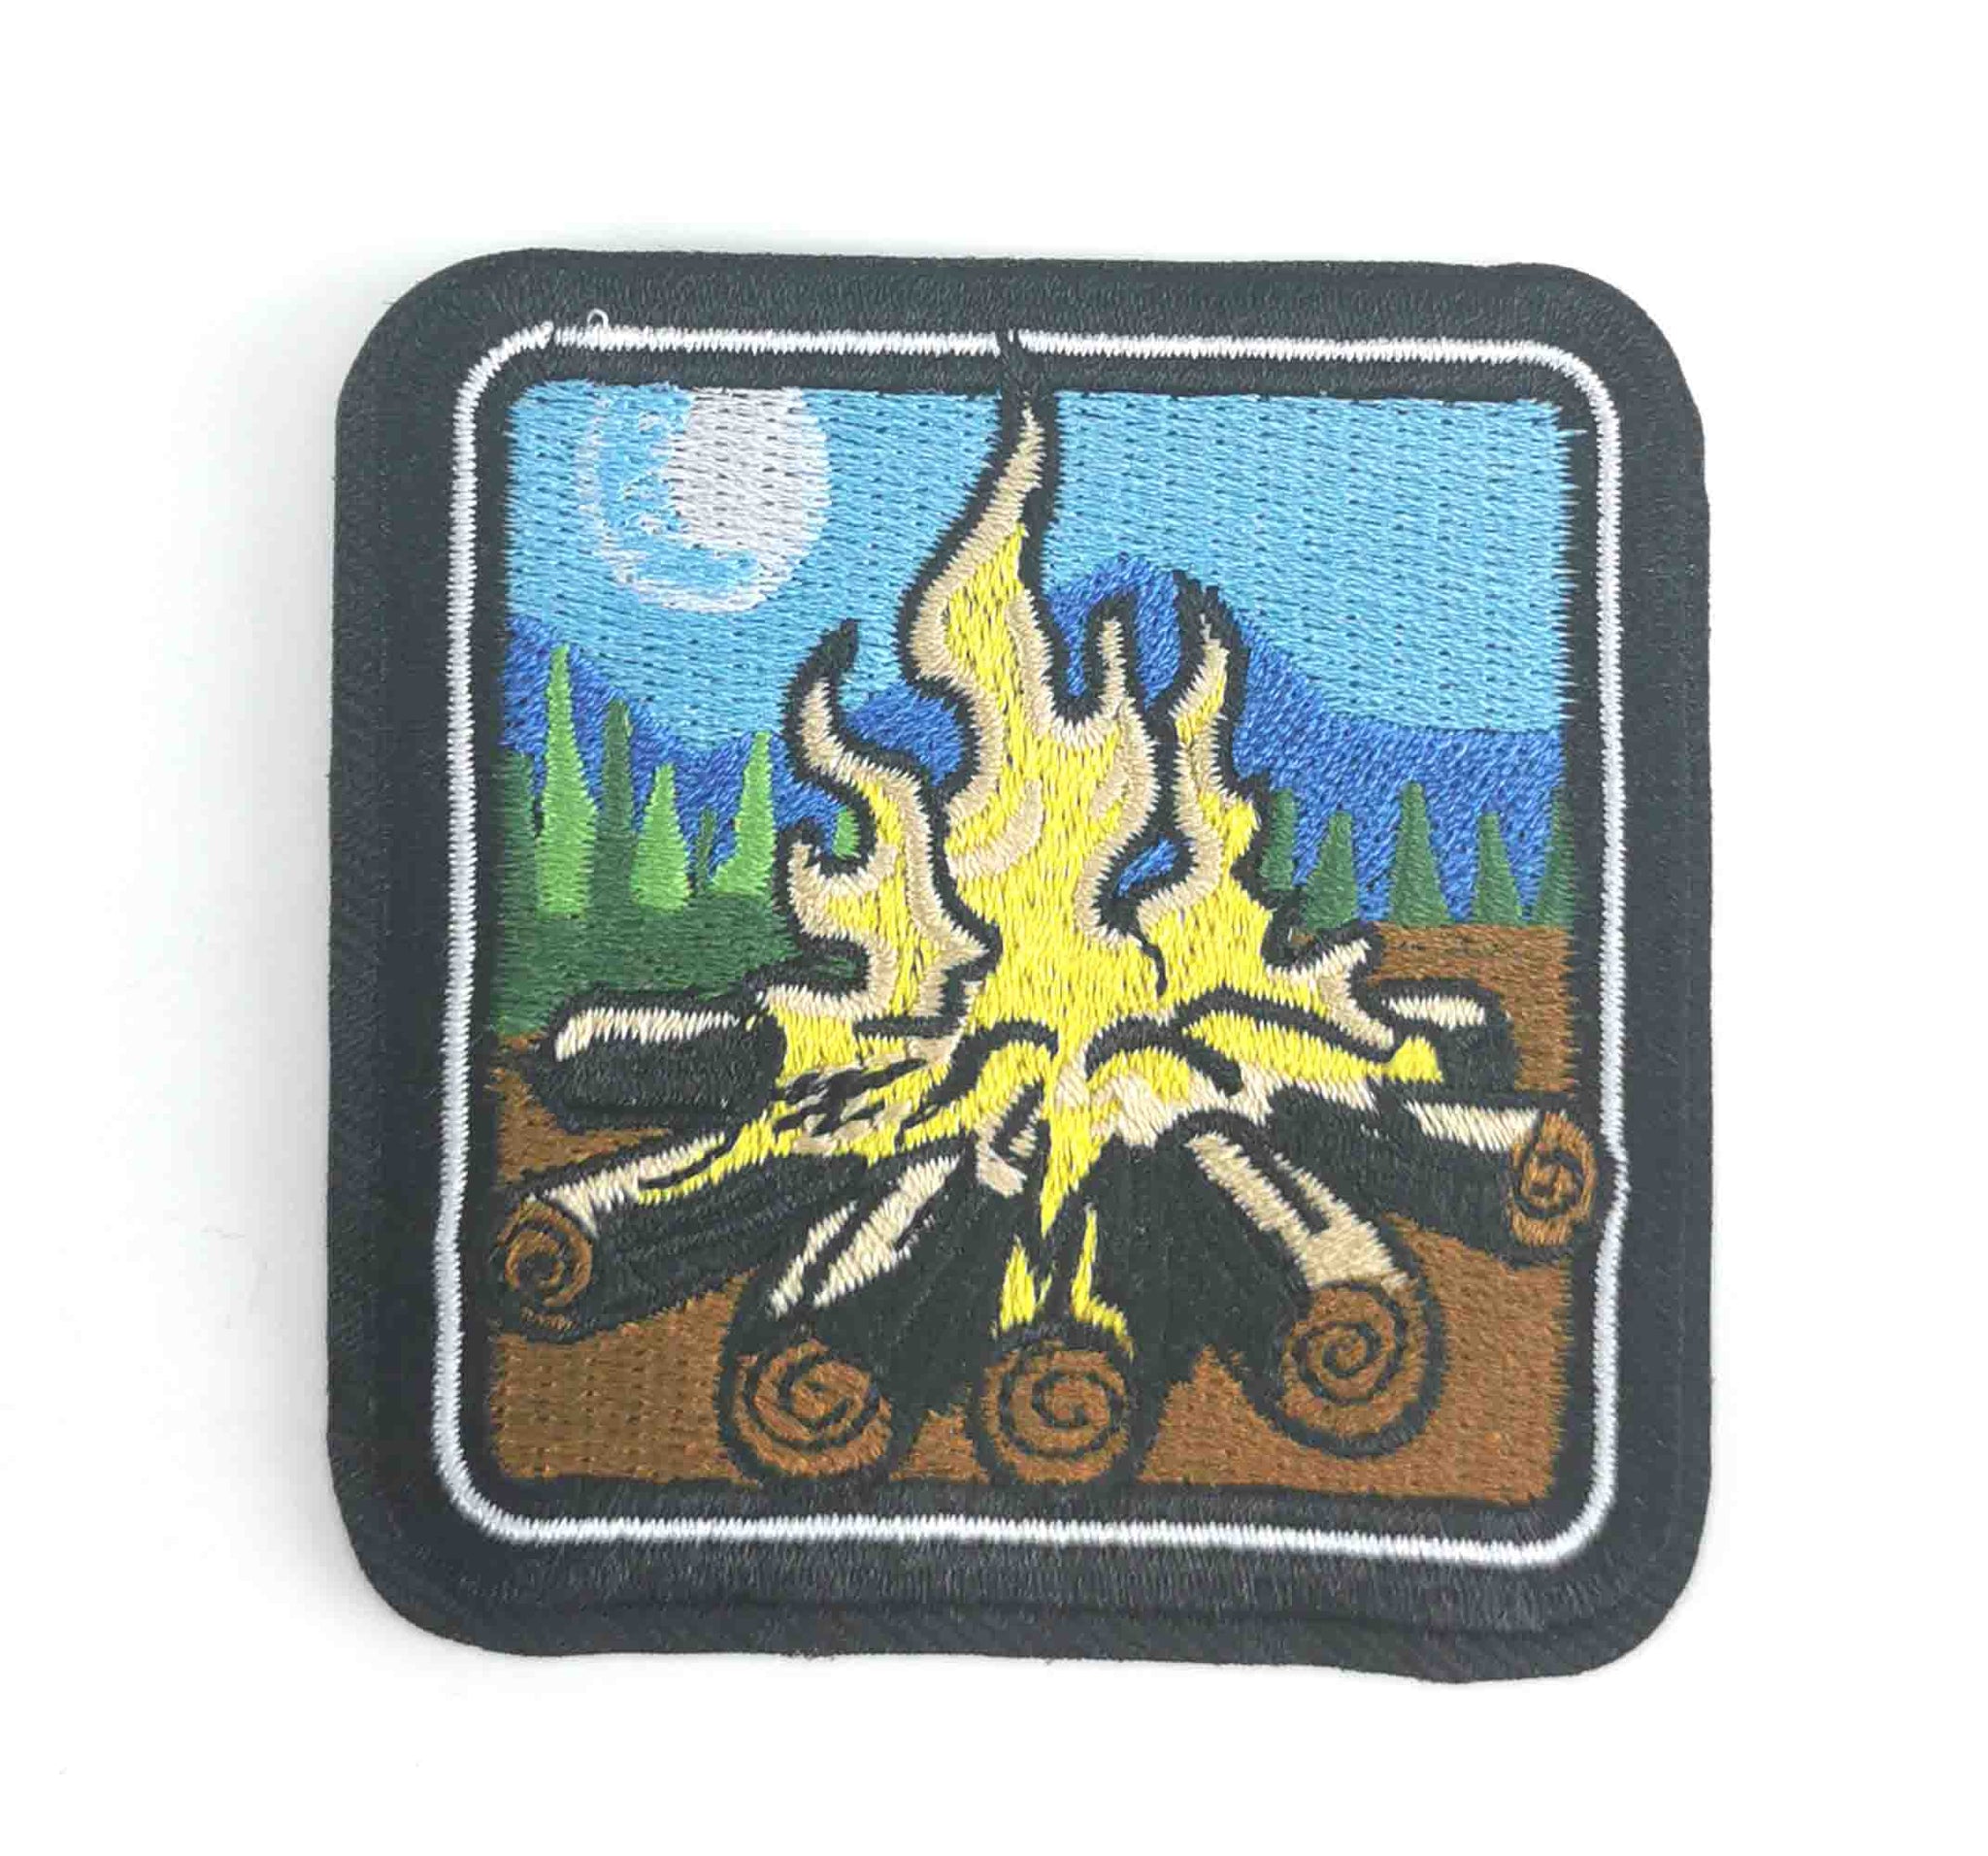 Campfire Iron-On Patch: Camp Camping Fire Hiking Outdoors Wilderness Nature 2005